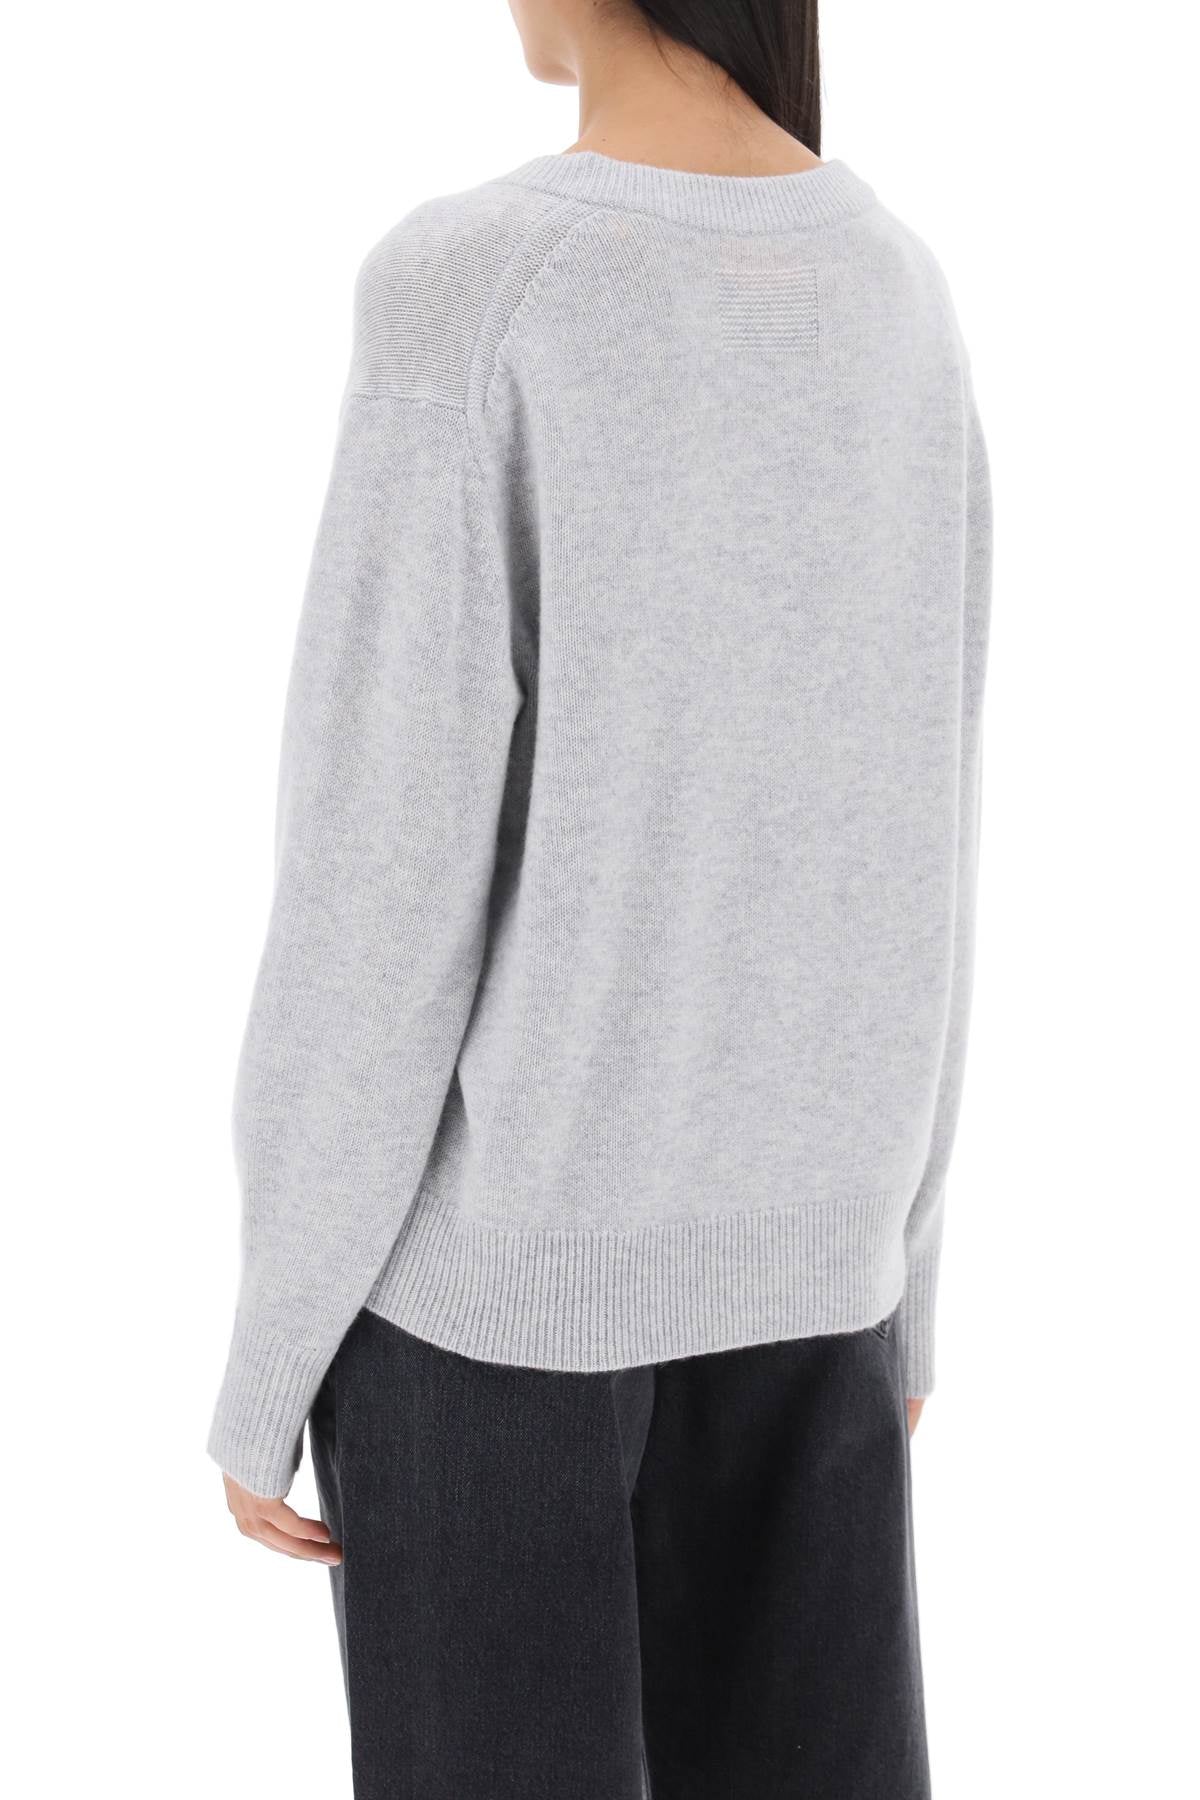 Guest in residence the v cashmere sweater-2